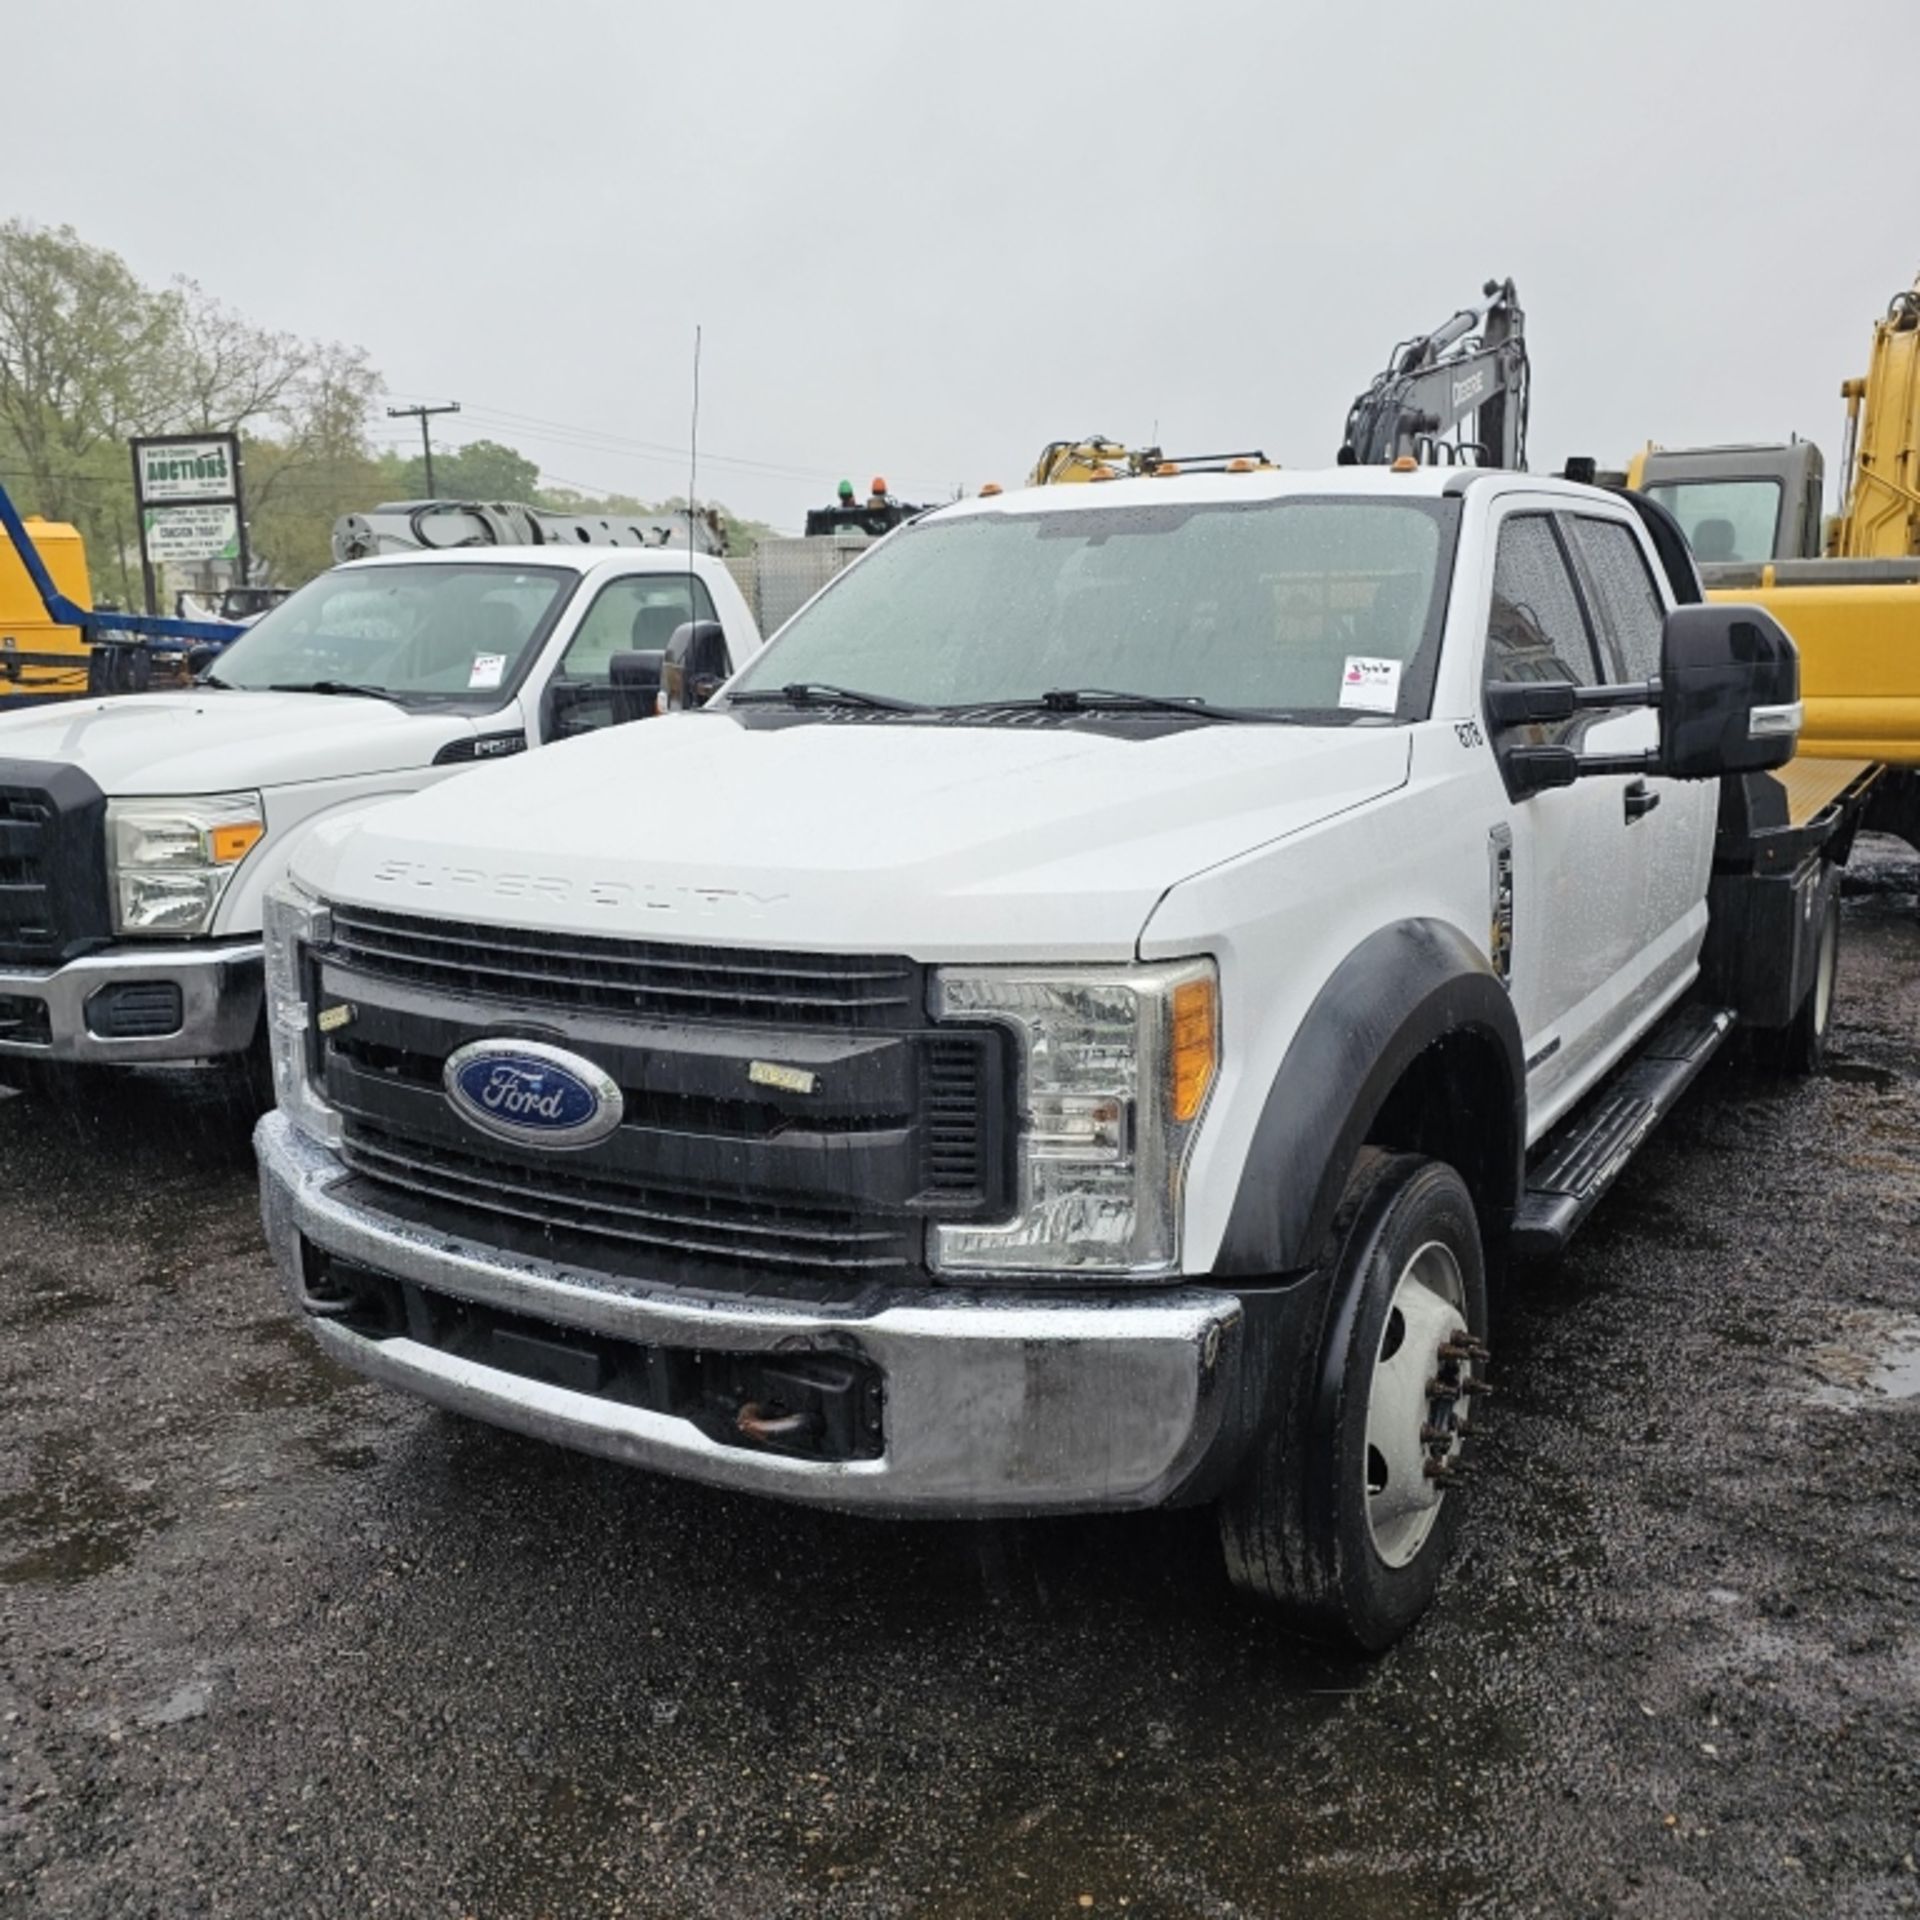 2017 Ford F350 Flatbed - Image 2 of 9